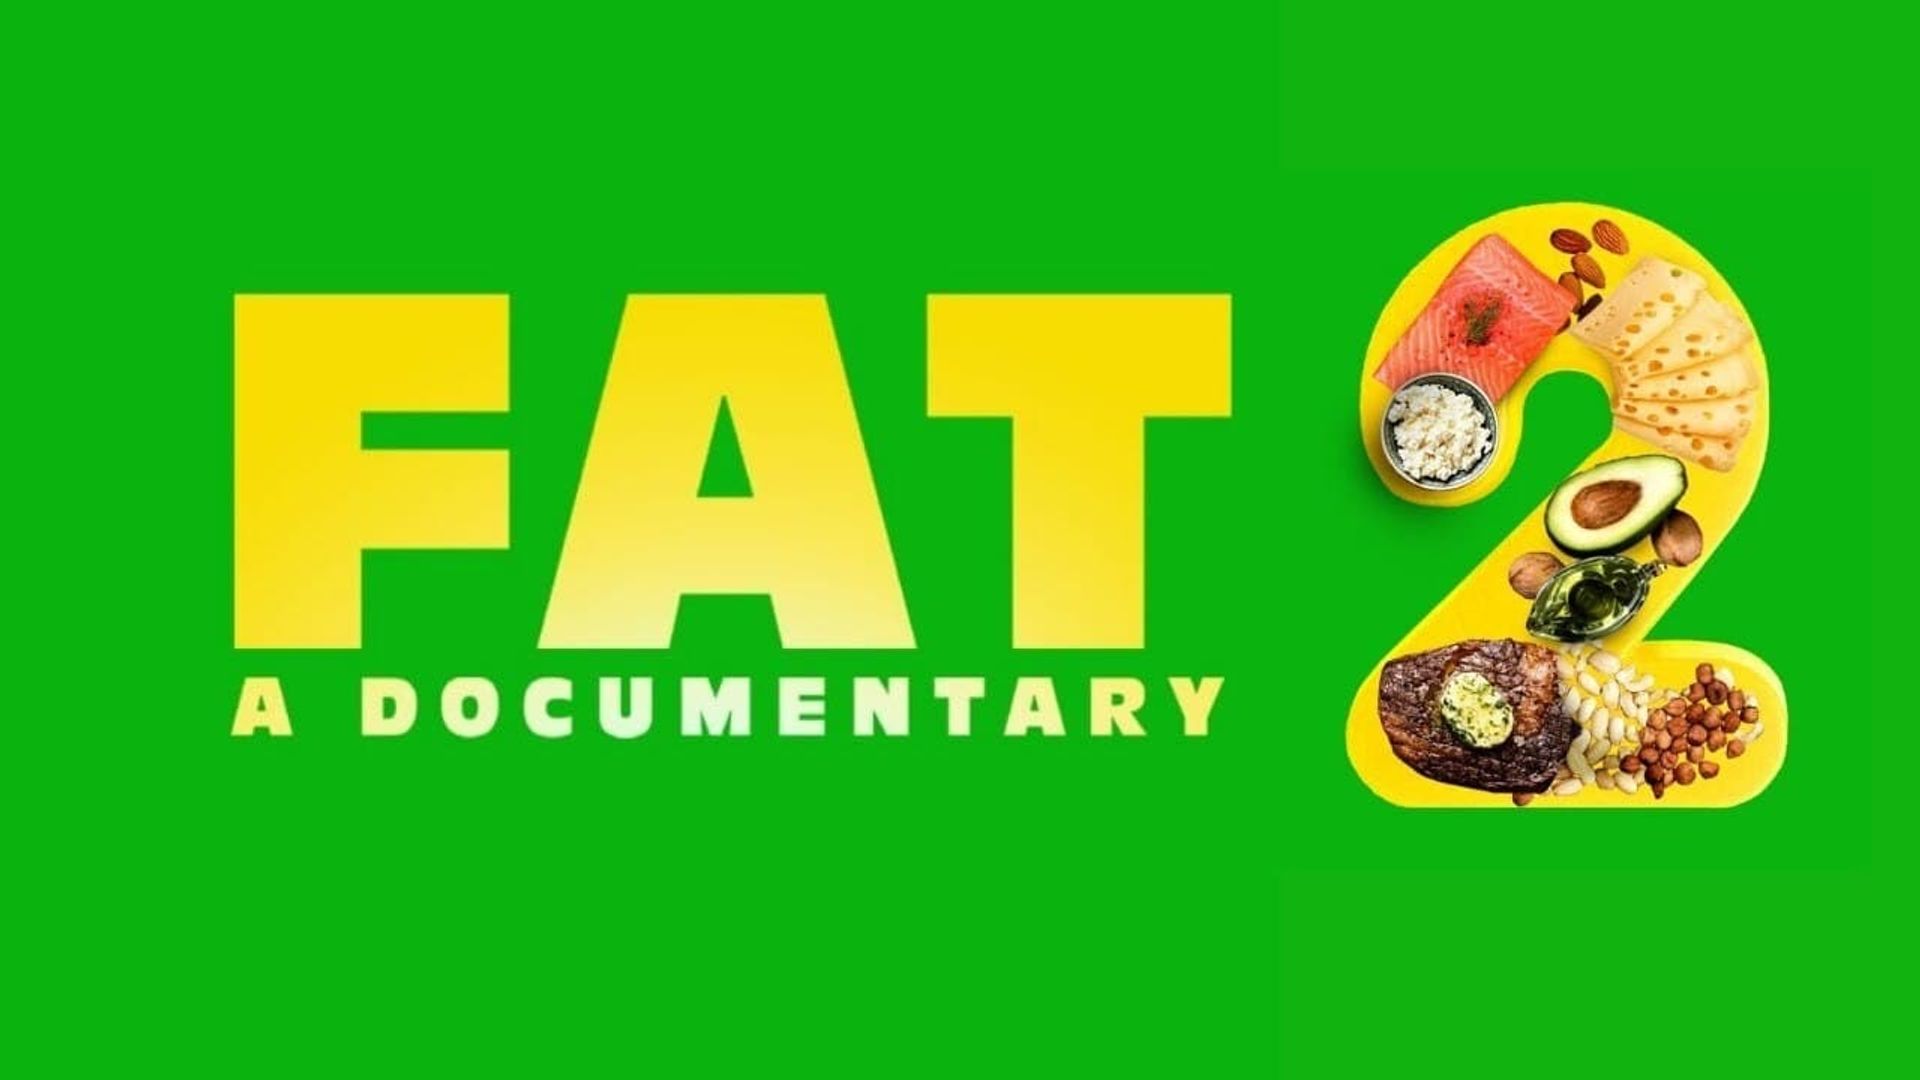 Fat: A Documentary 2 background